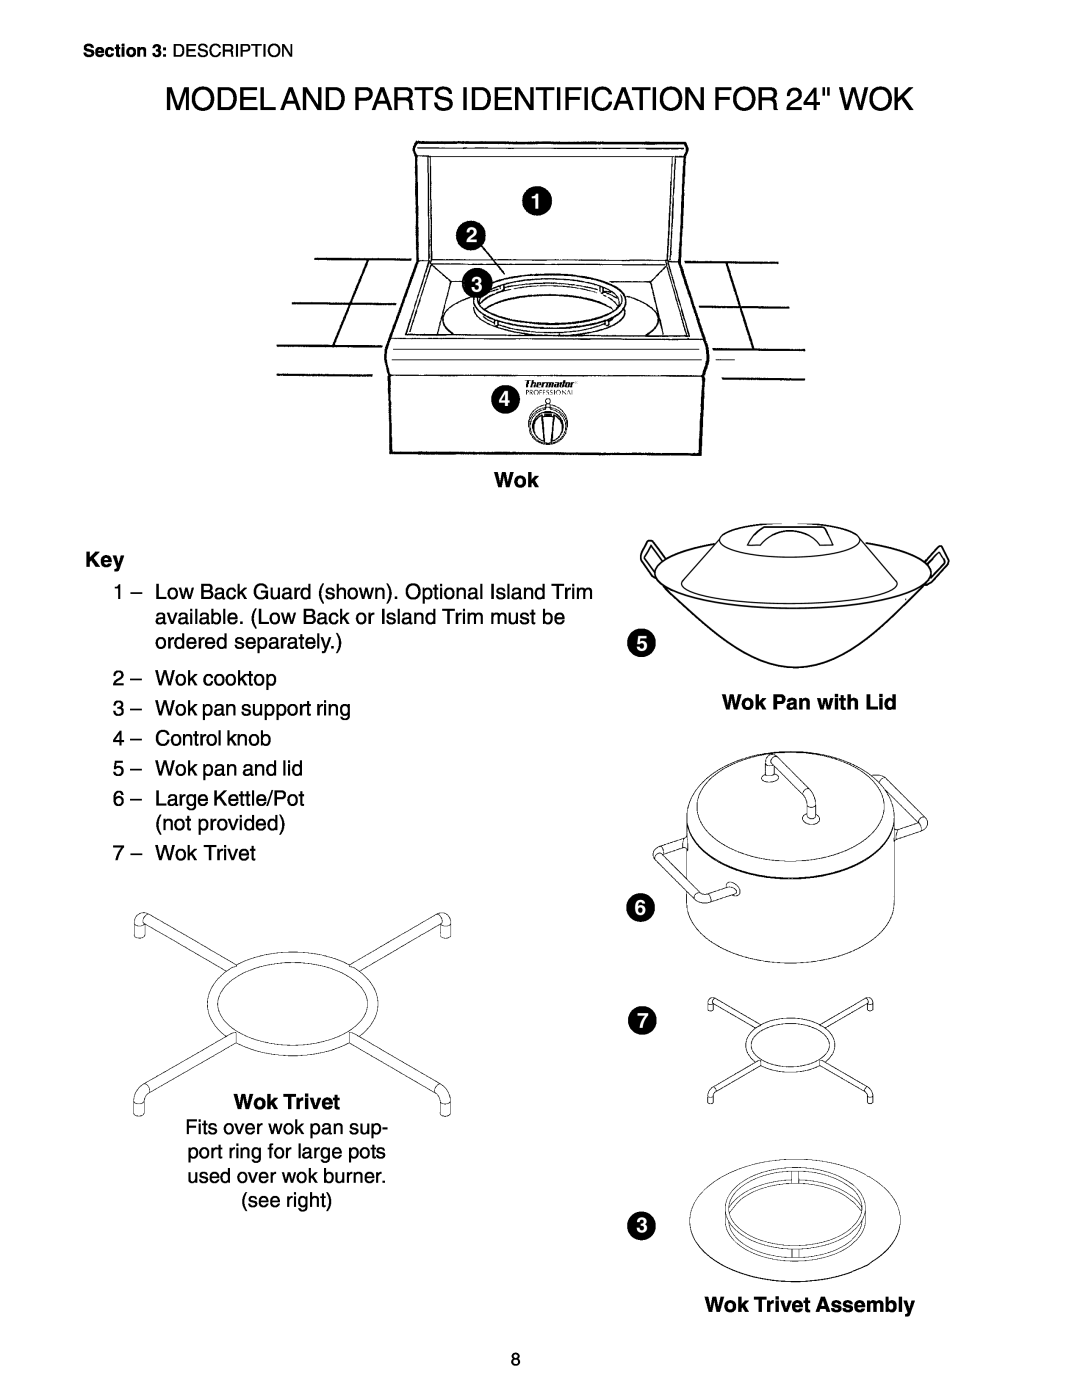 Thermador PC30, P24GE MODEL AND PARTS IDENTIFICATION FOR 24 WOK, Wok Key, Wok Pan with Lid, Wok Trivet Assembly 